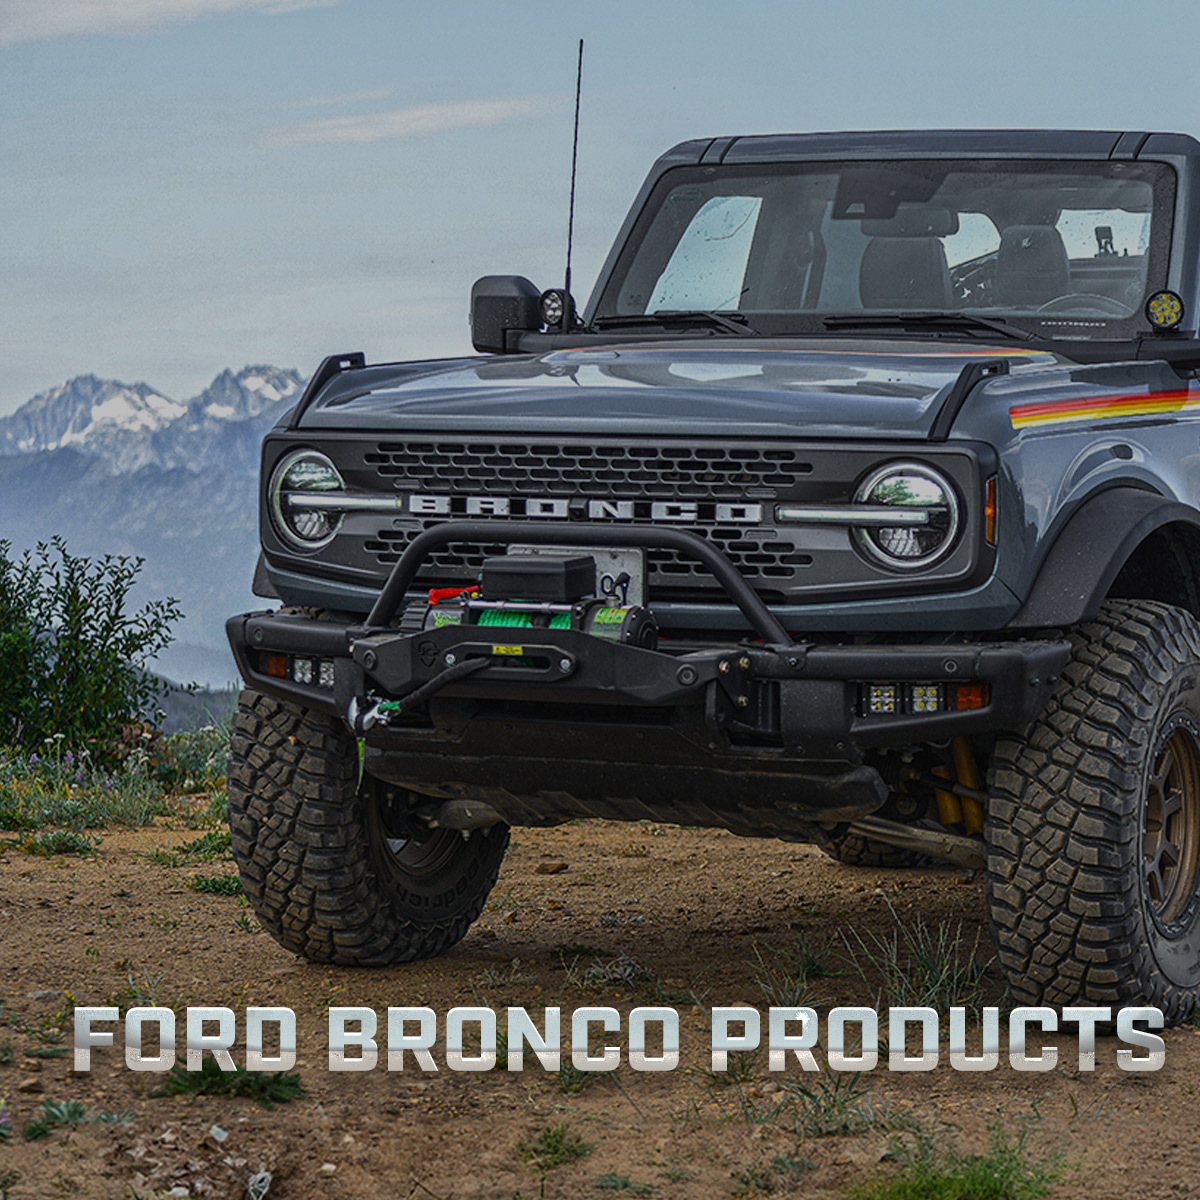 Scorpion Extreme Products Ford Bronco Products